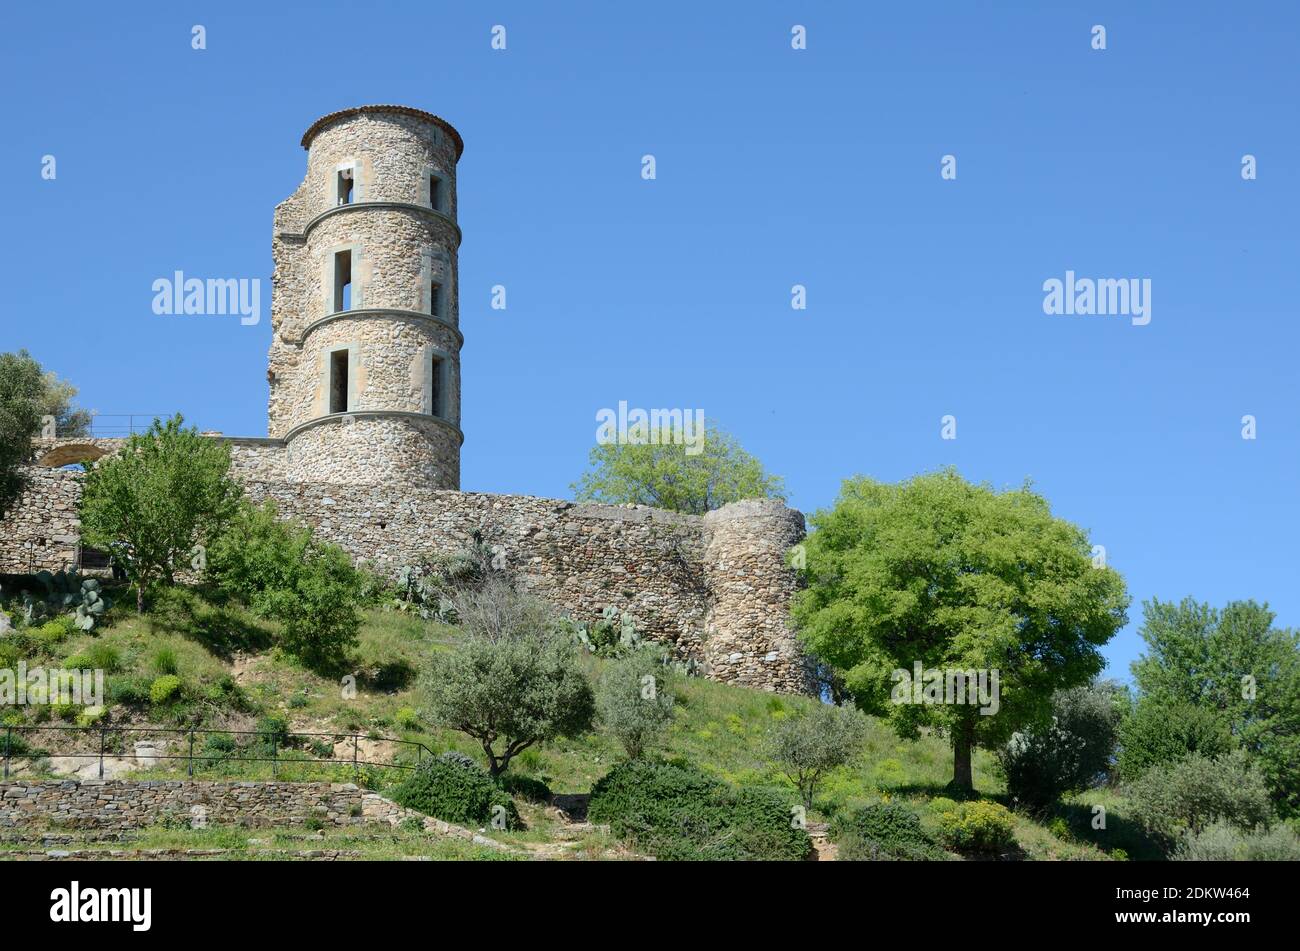 Round Stone Tower of the Ruined Château or Castle Ruins of Grimaud Castle Var Provence France Stock Photo